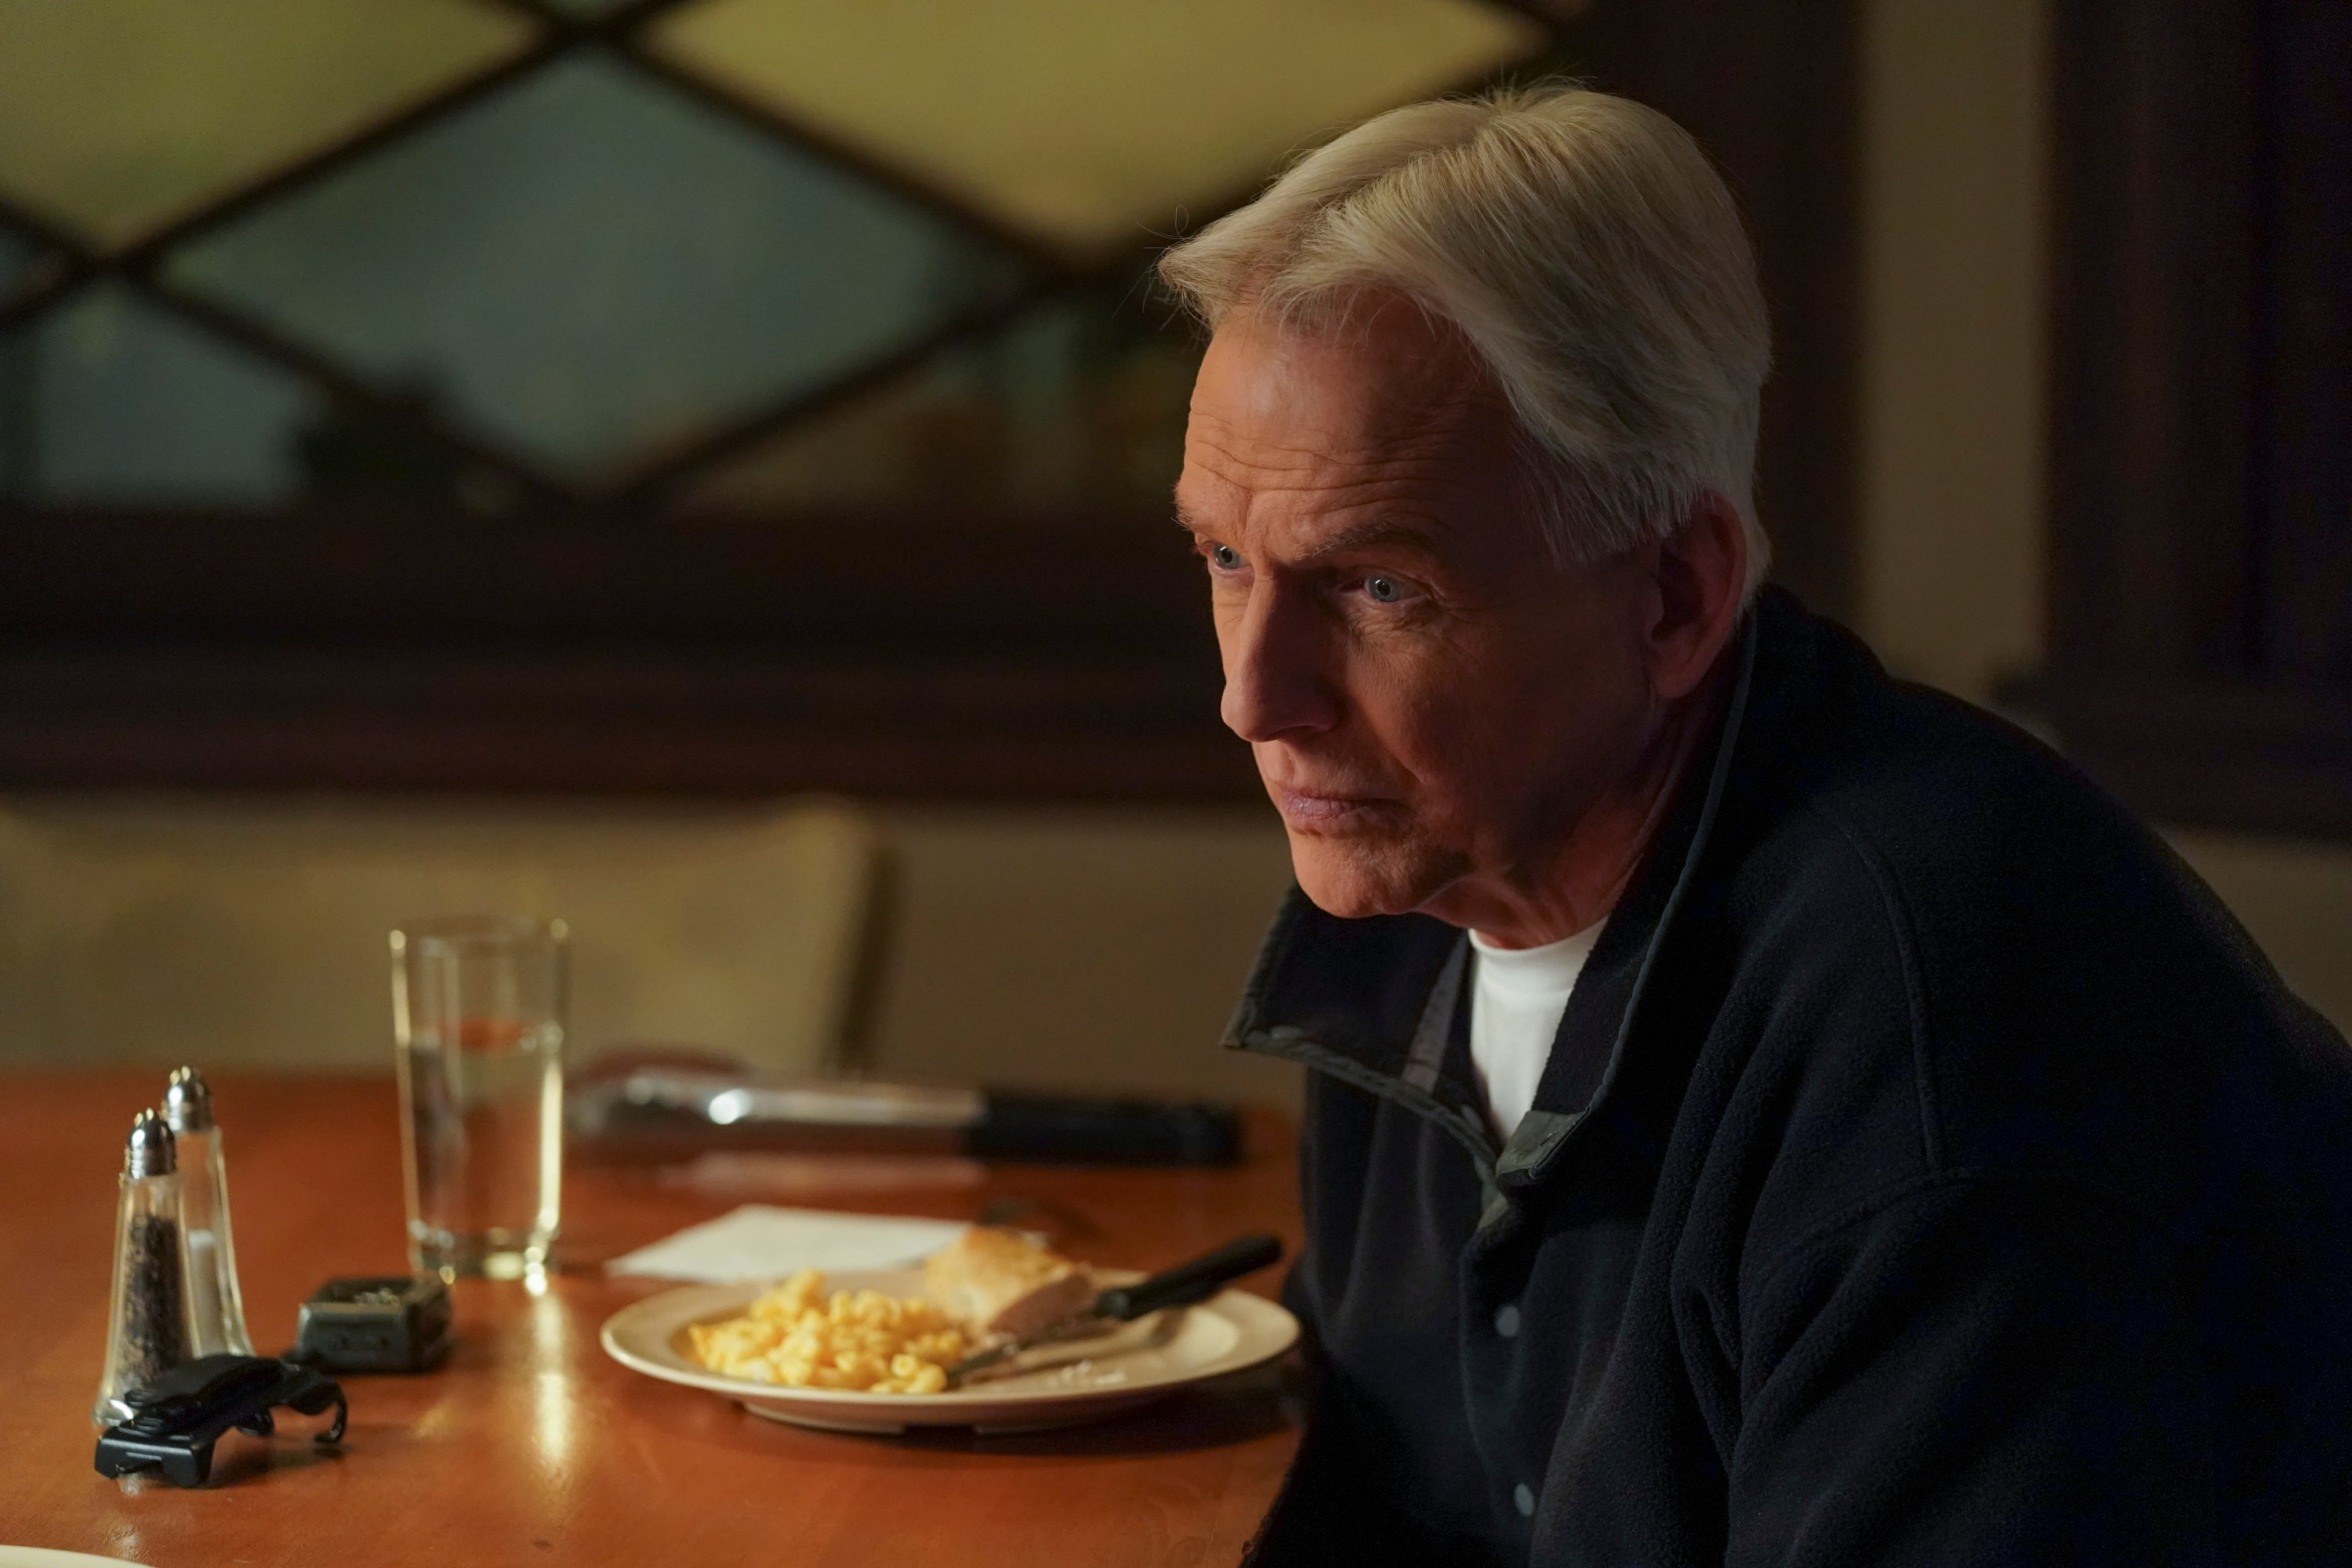 Mark Harmon as Gibbs, sitting at the dinner table during a scene from 'NCIS'